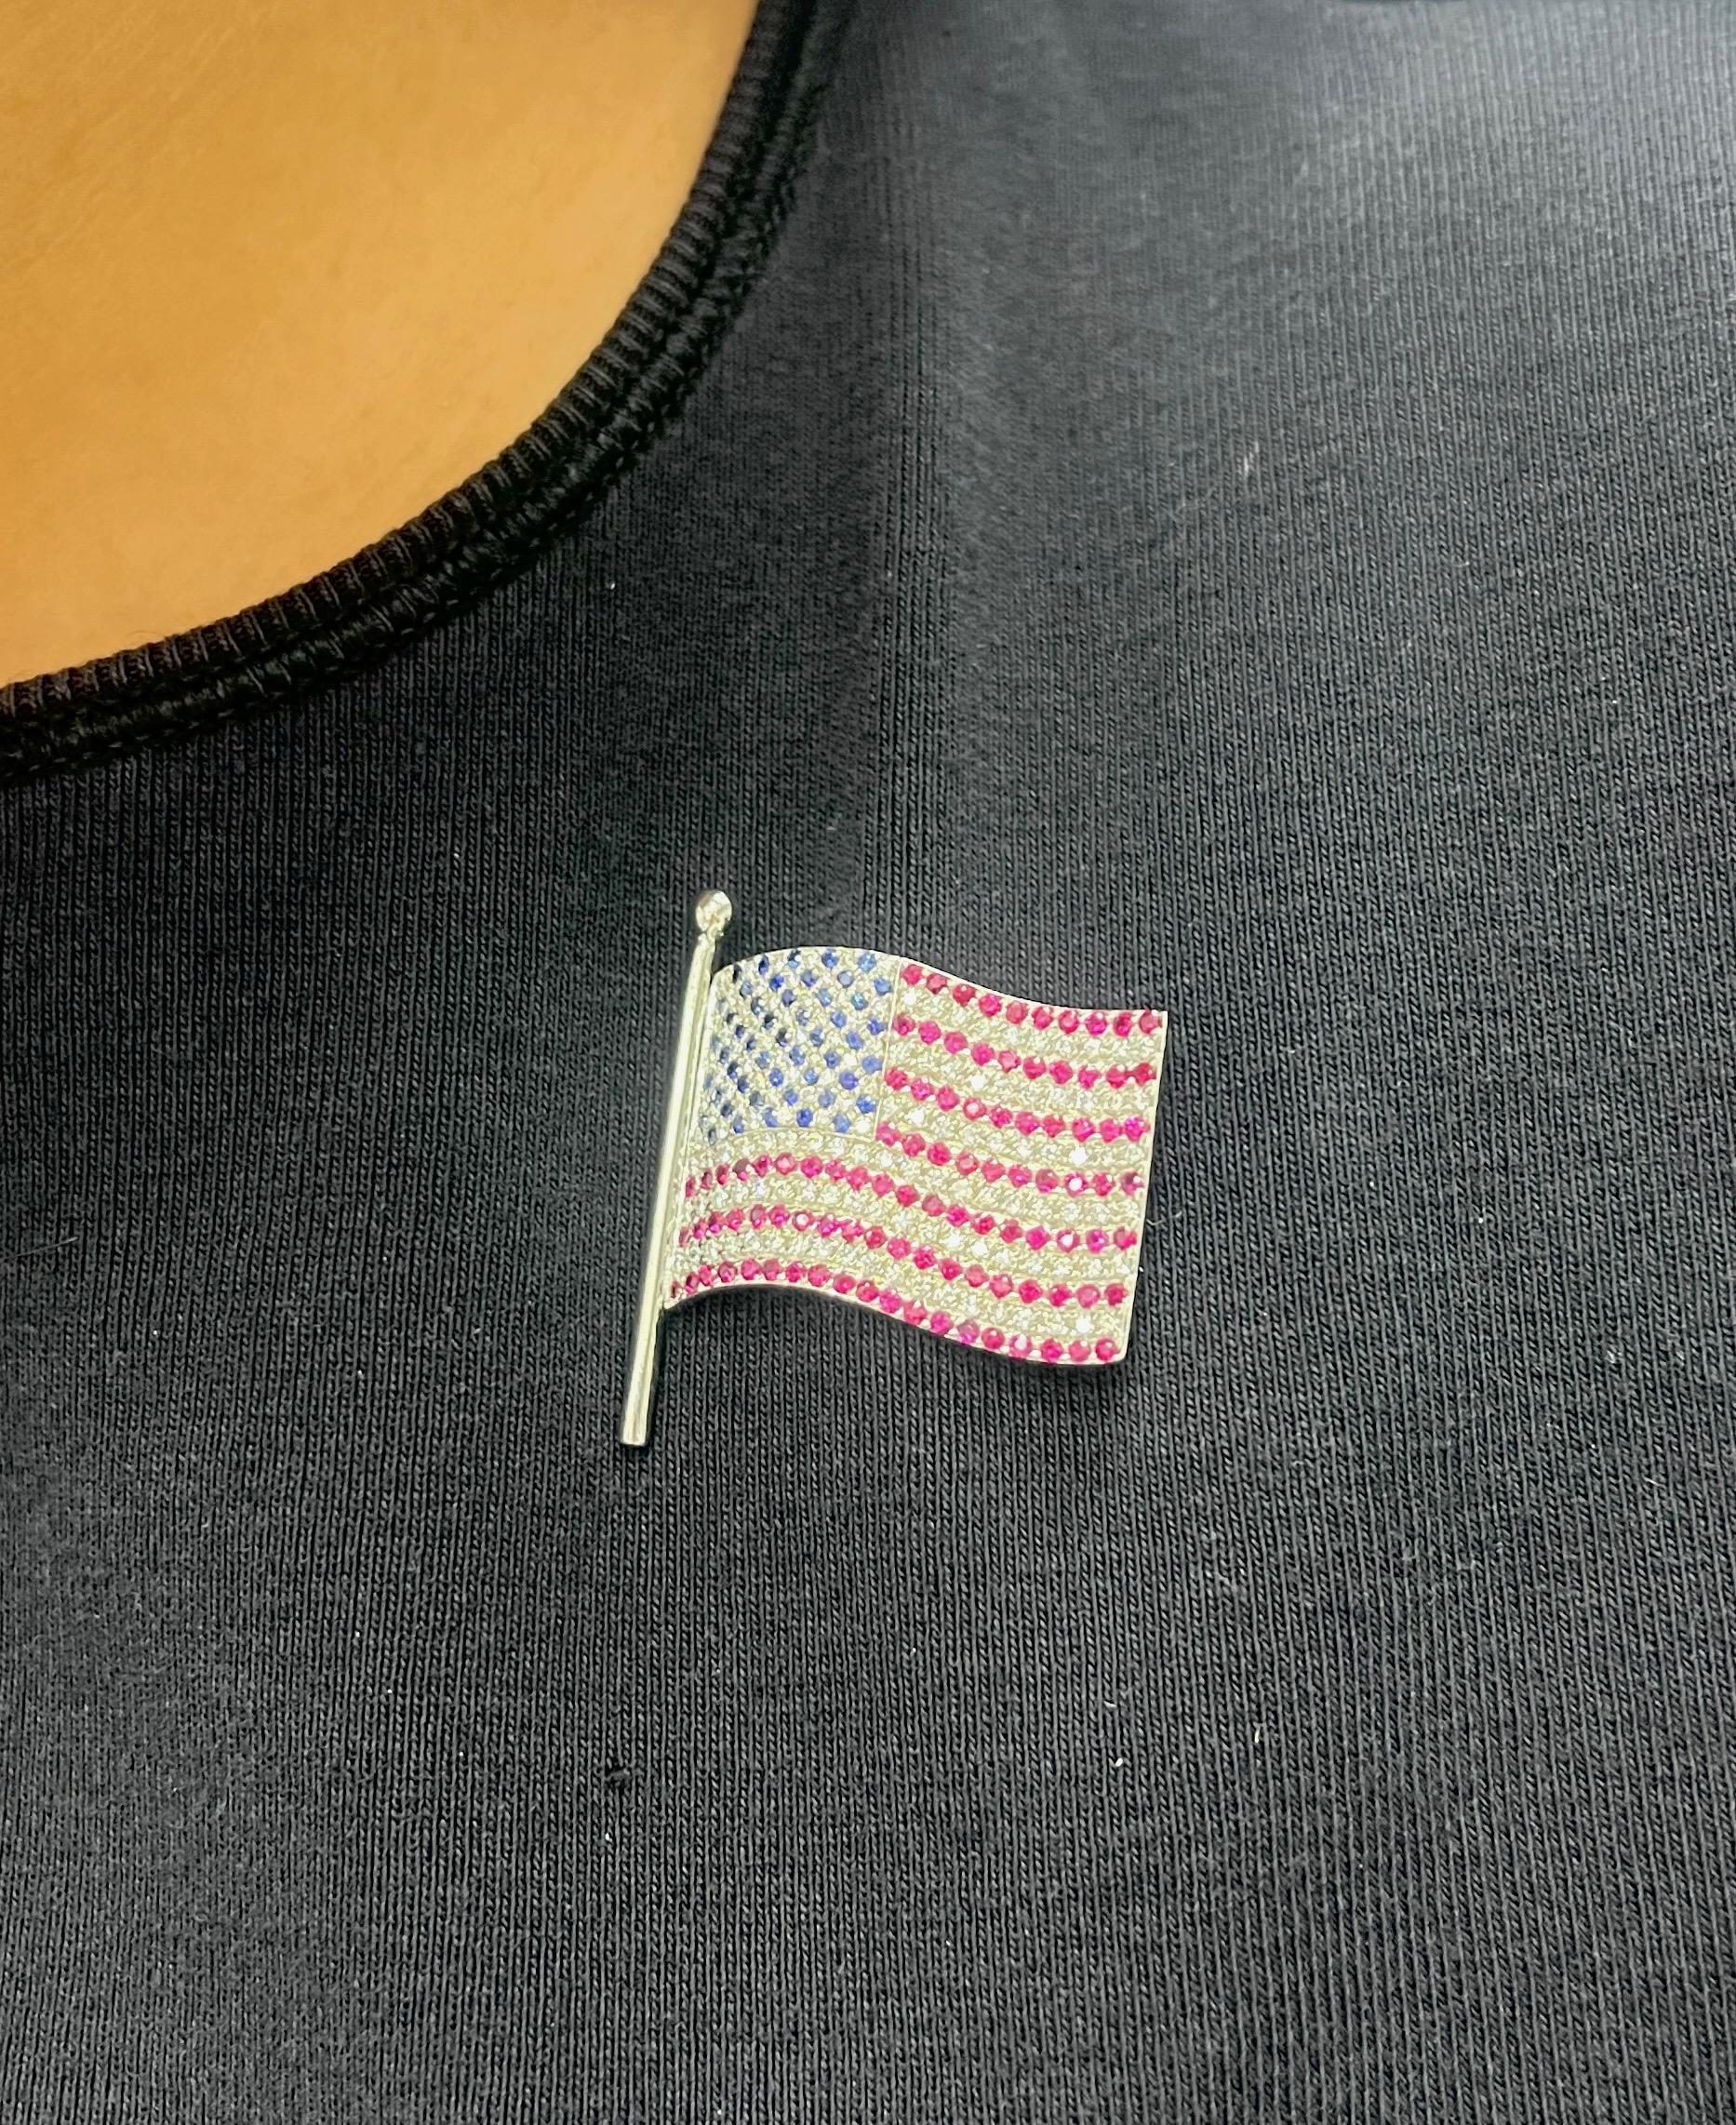 American Flag Pin Brooch In Excellent Condition For Sale In New York, NY